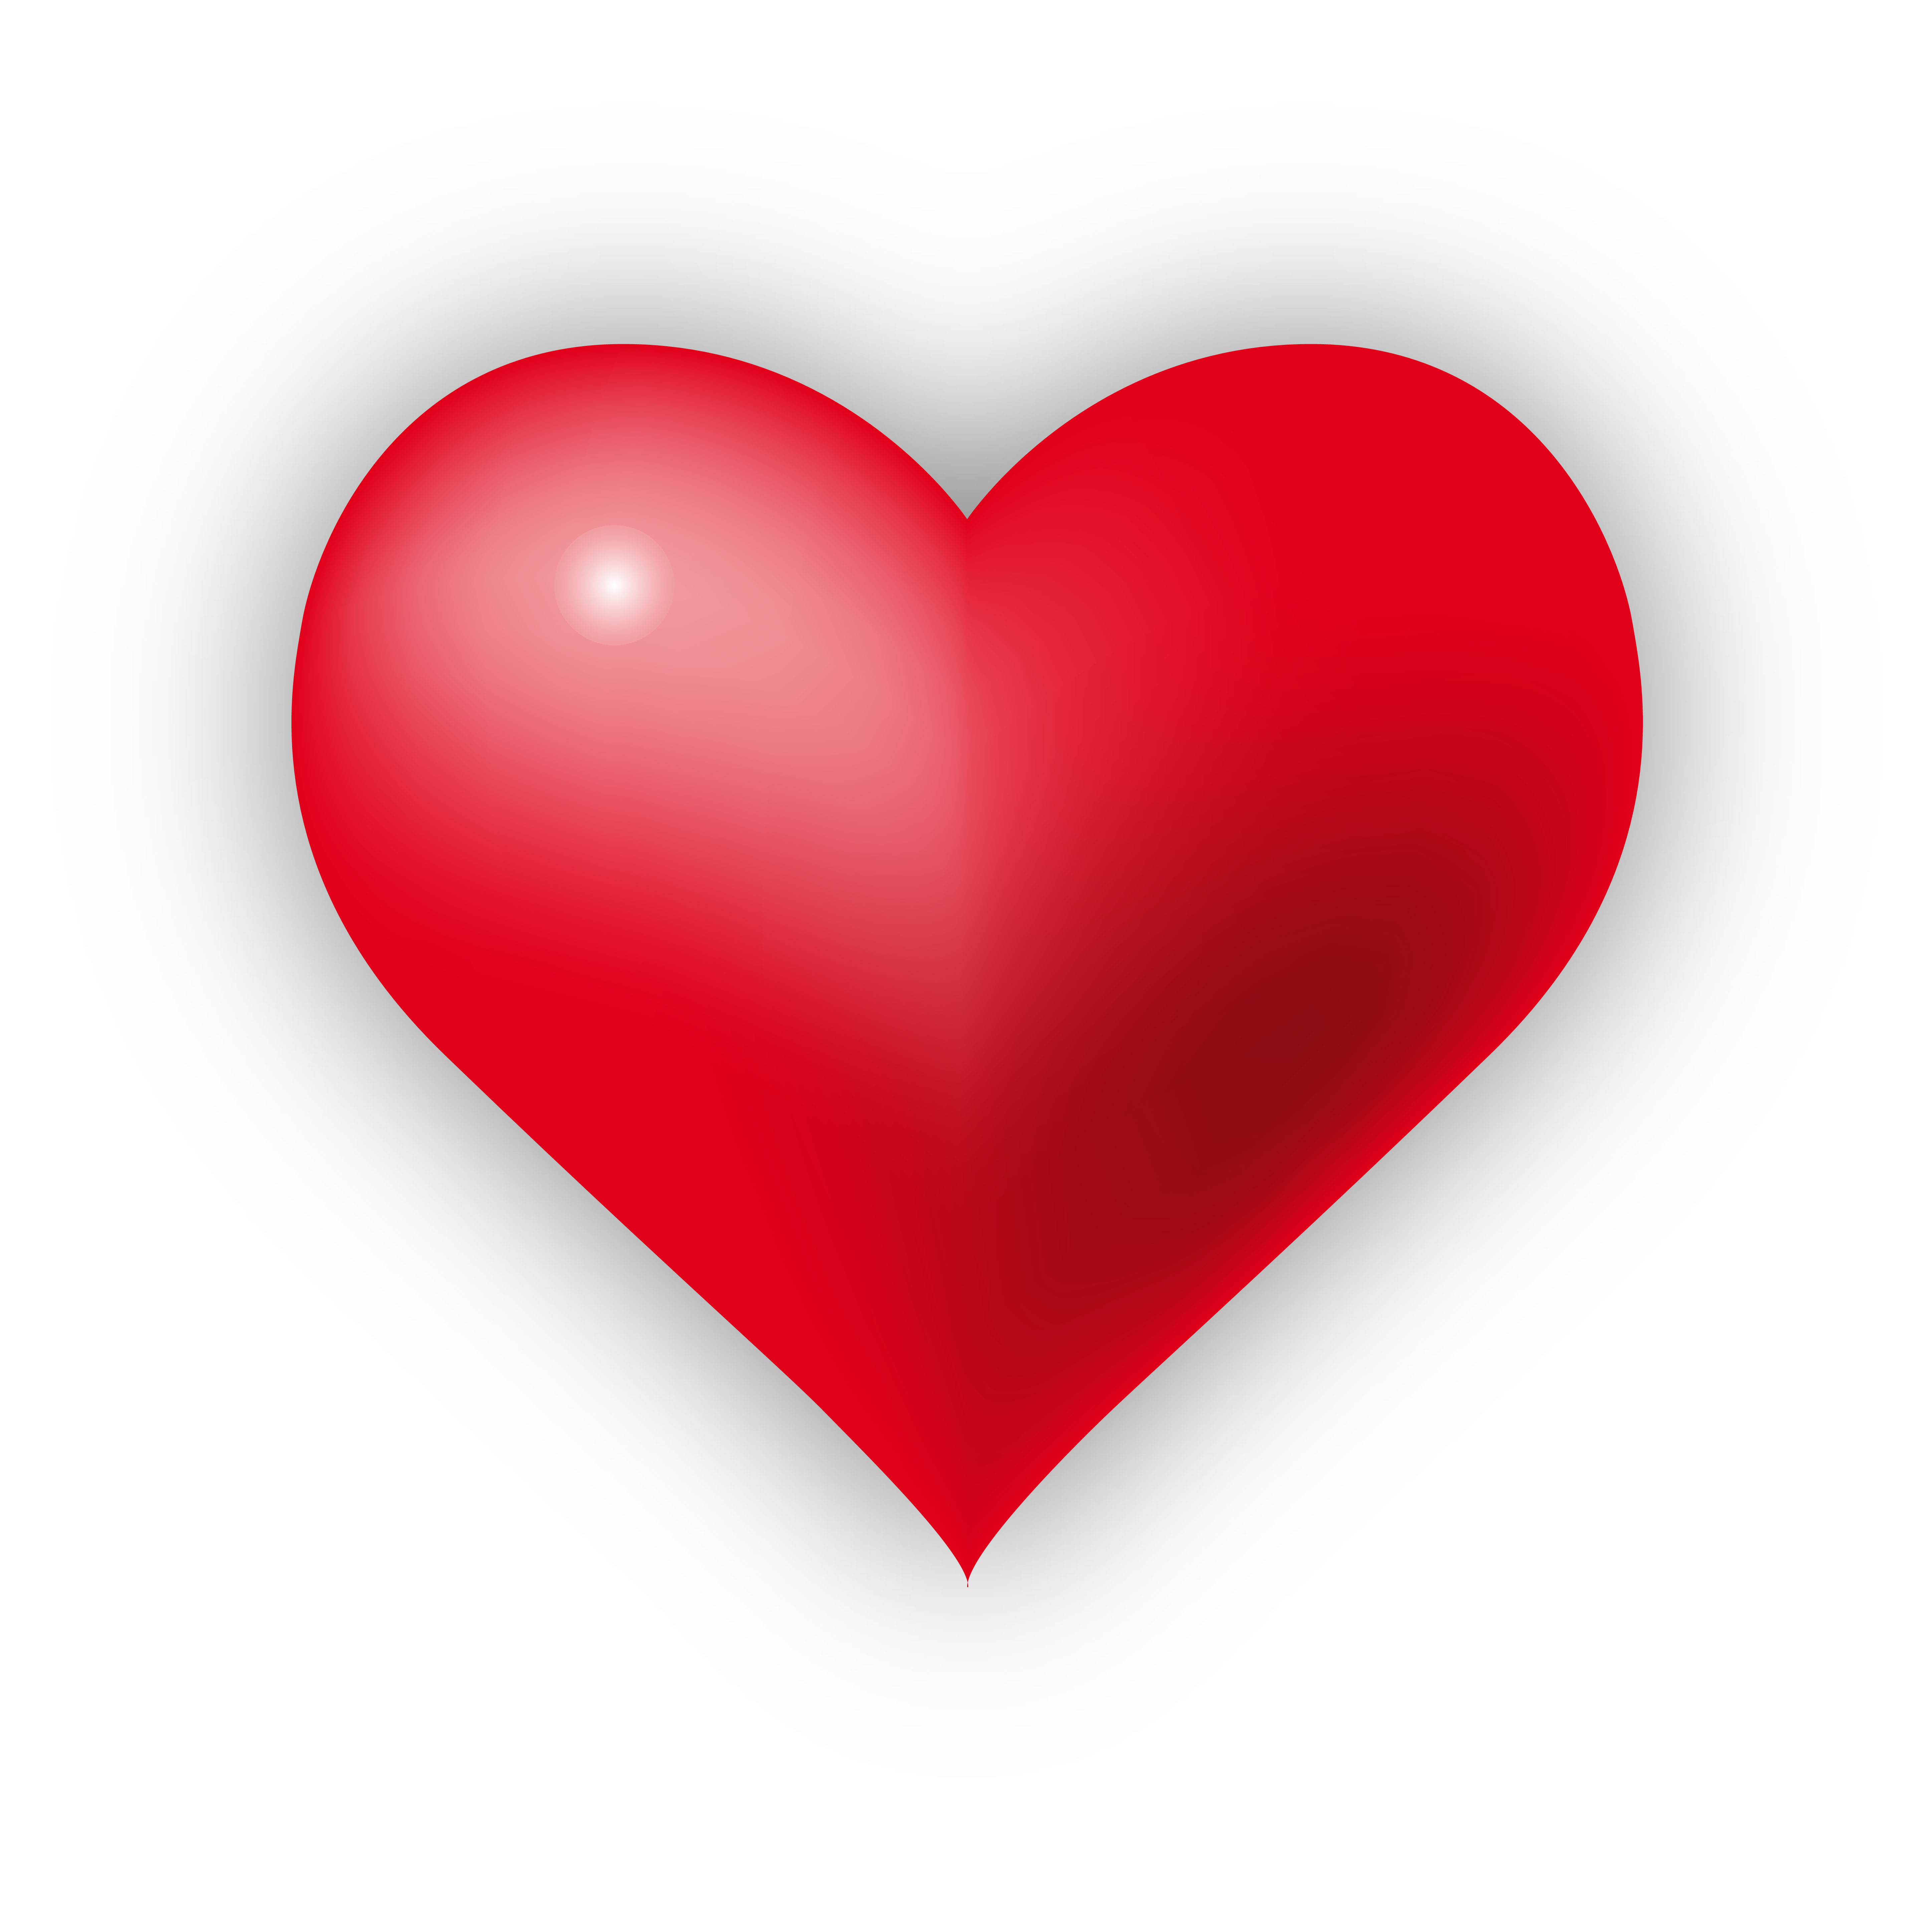 Free Valentine Day Heart Images, Download Free Clip Art.